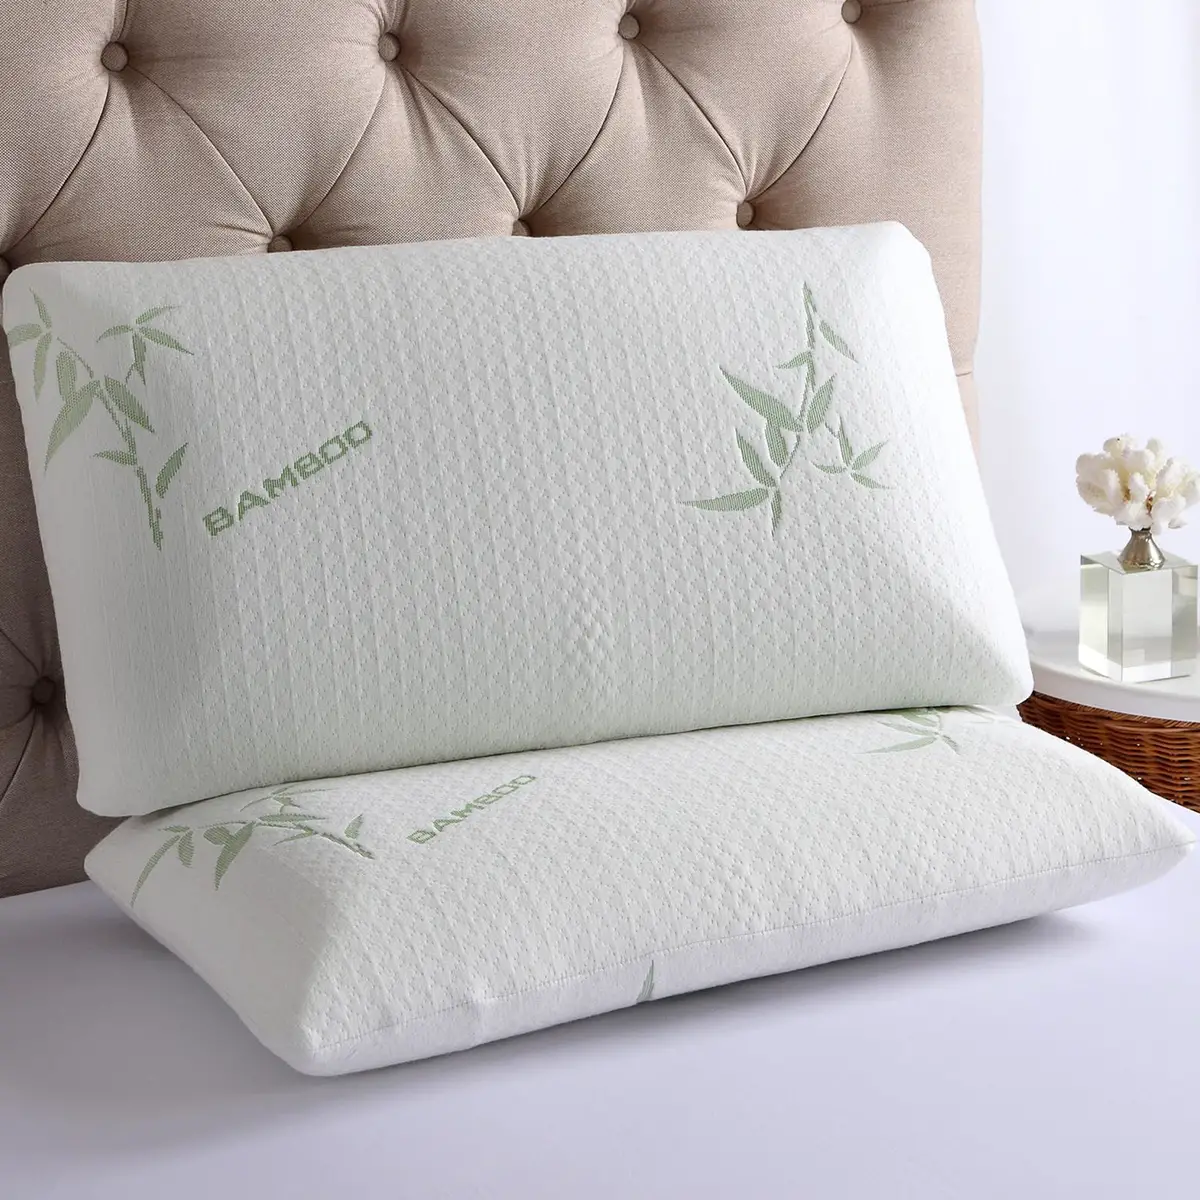 2 x Contour Memory Foam Pillow Bamboo Luxury Firm Head Neck Support ...